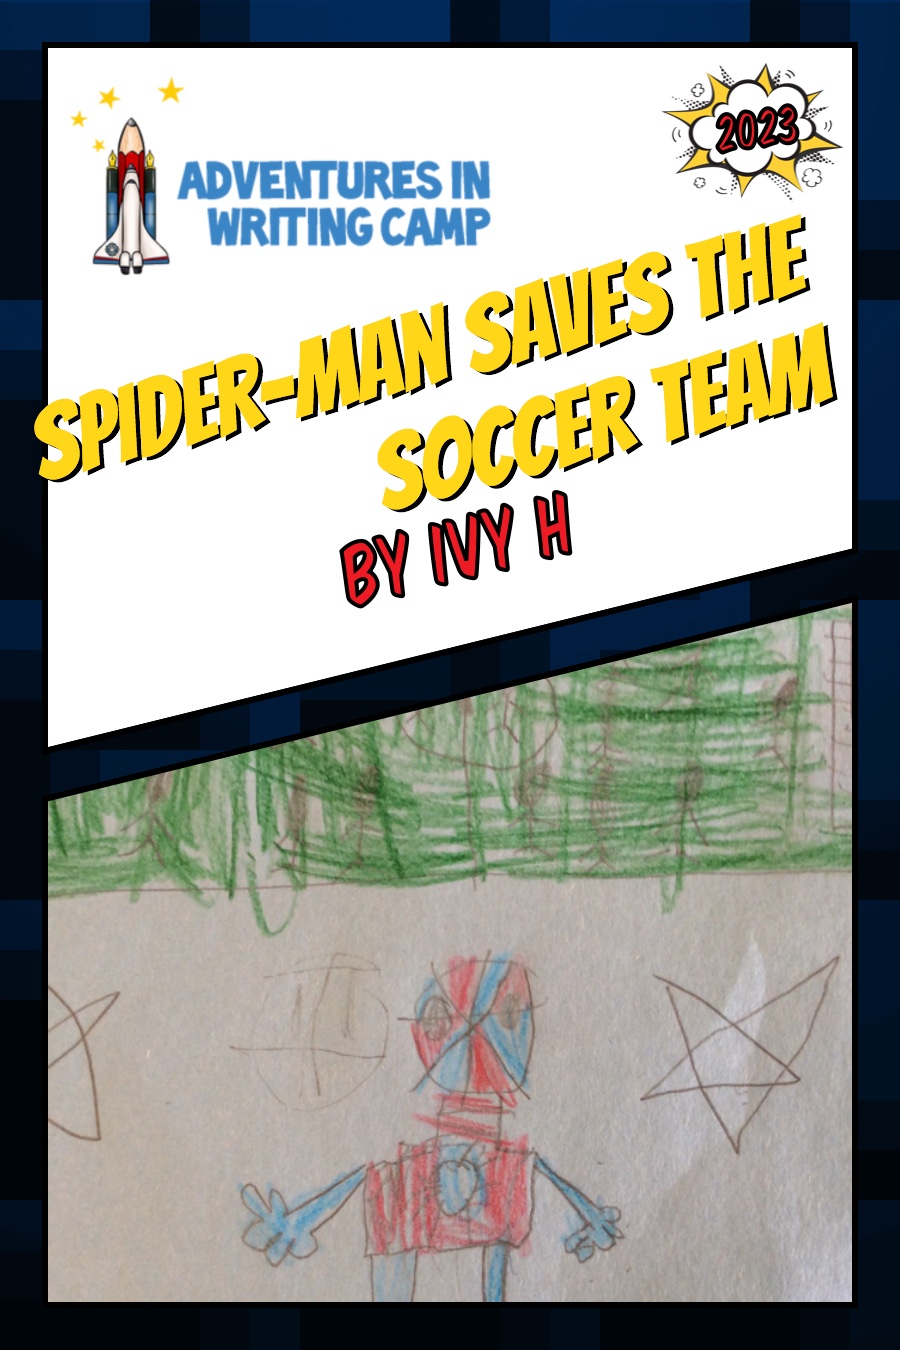 Spiderman Saves the Soccer Team by Ivy H